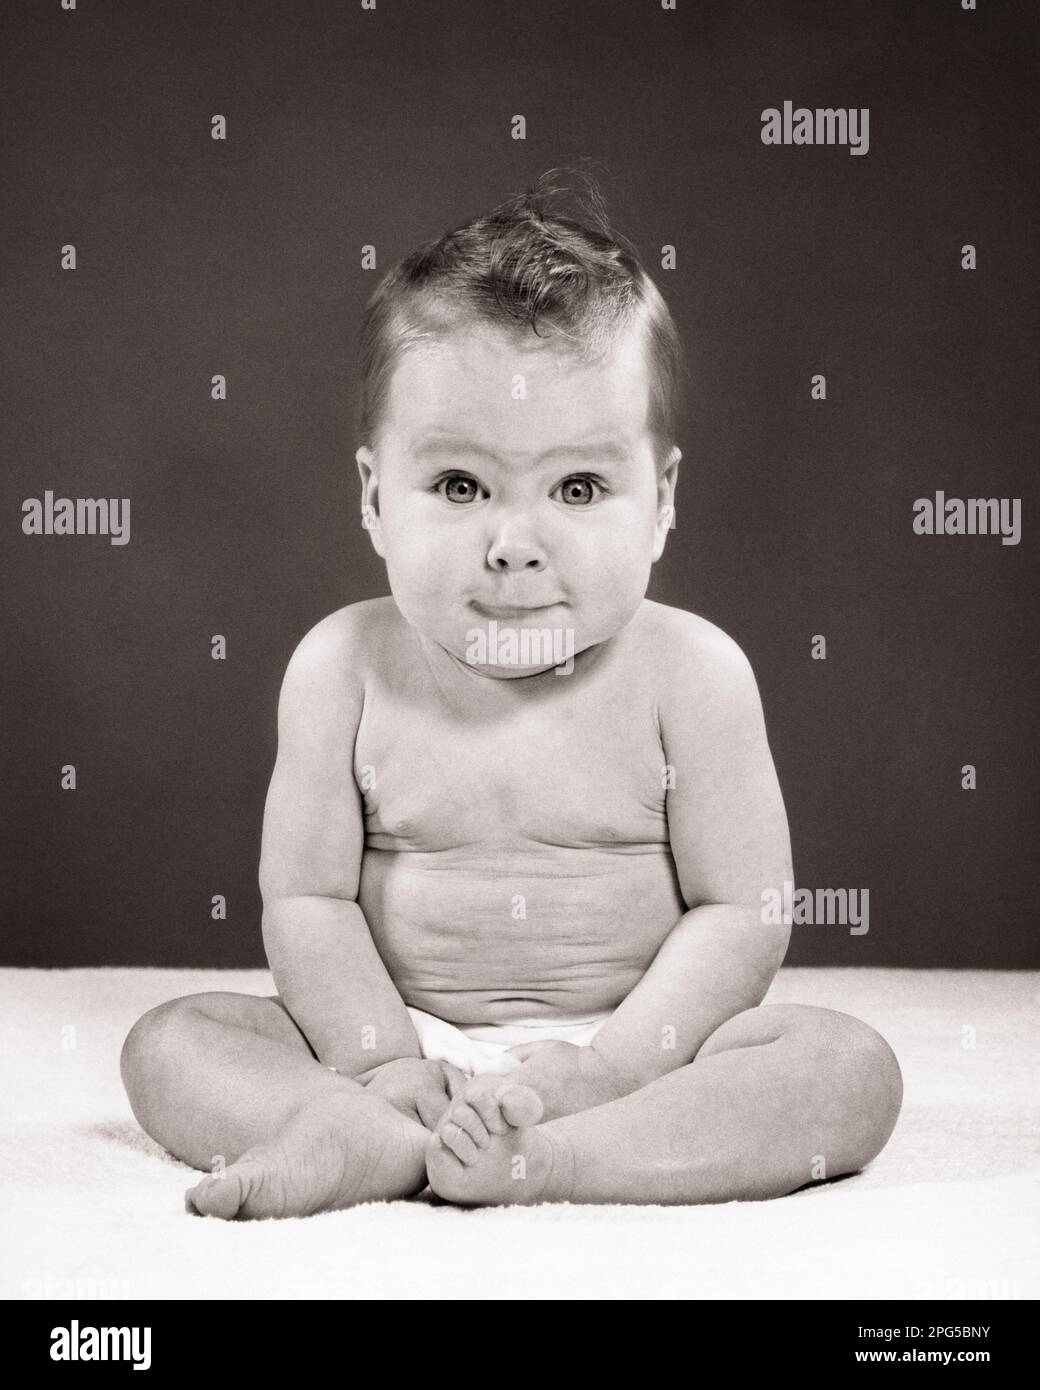 1950s BABY GIRL SITTING UP FULL LENGTH FUNNY FACIAL EXPRESSION LOOKING AT CAMERA - b7488 HAR001 HARS LIFESTYLE SATISFACTION FEMALES WINNING STUDIO SHOT HEALTHINESS HOME LIFE COPY SPACE FULL-LENGTH CONFIDENCE EXPRESSIONS B&W WIDE EYE CONTACT BUG-EYED HUMOROUS HAPPINESS DISCOVERY COMICAL UP BUDDHA SMILES COMEDY JOYFUL PLEASANT WIDE-EYED AGREEABLE CHARMING GROWTH JUVENILES LOVABLE PLEASING STARTLED ADORABLE APPEALING BABY GIRL BLACK AND WHITE CAUCASIAN ETHNICITY HAR001 OLD FASHIONED Stock Photo